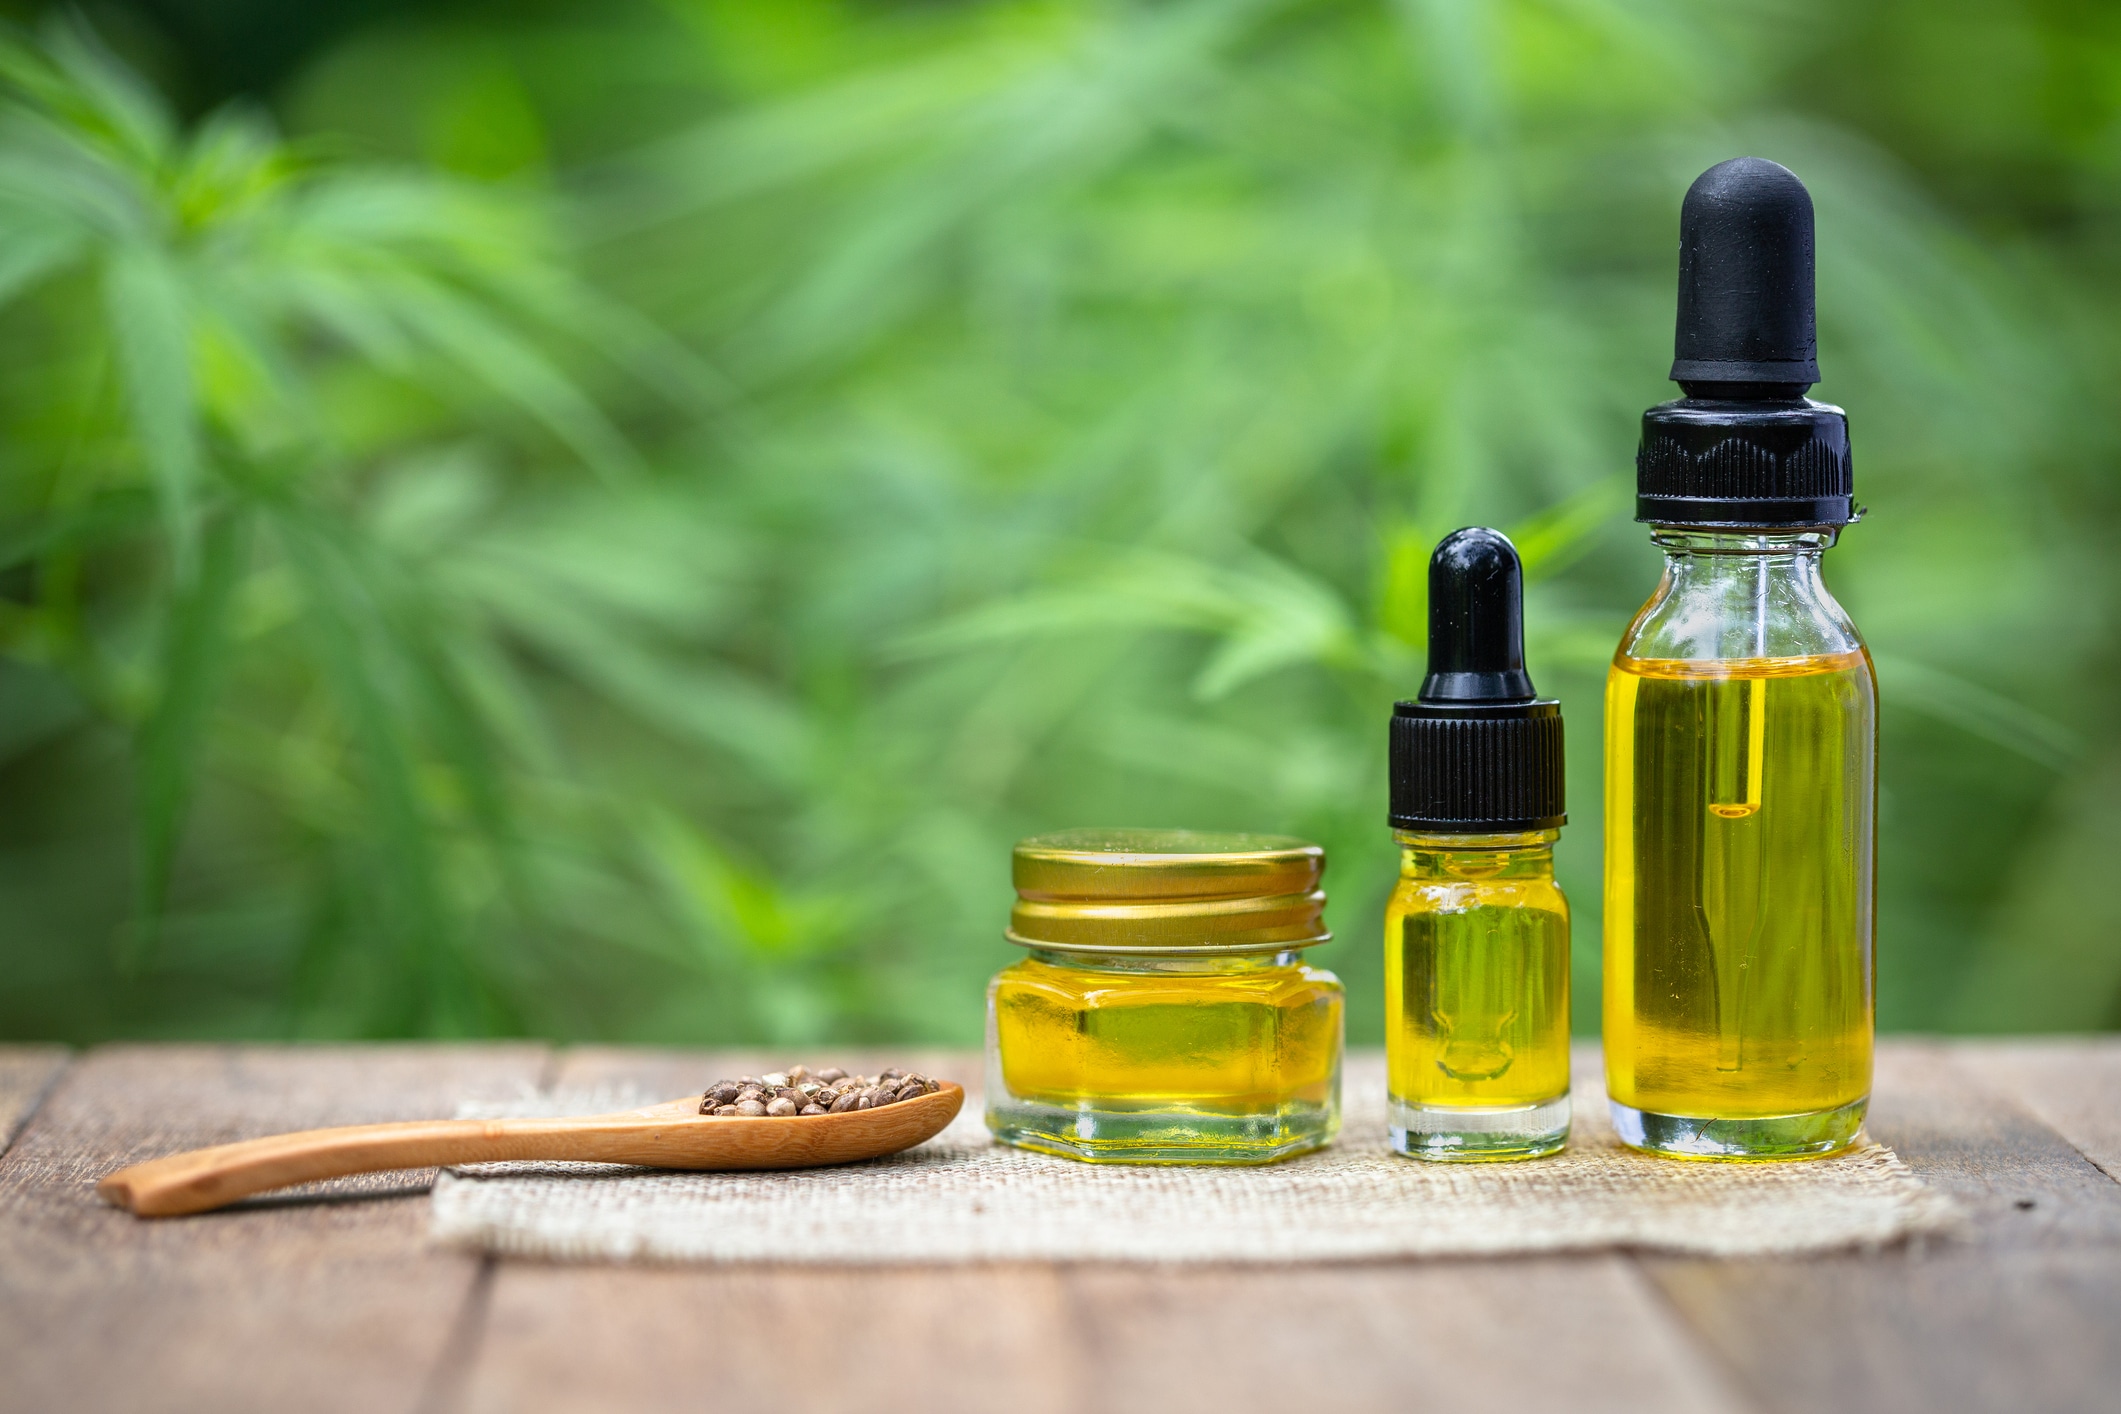 What to Look for When Purchasing CBD Hemp Oil | EcoFarming Daily